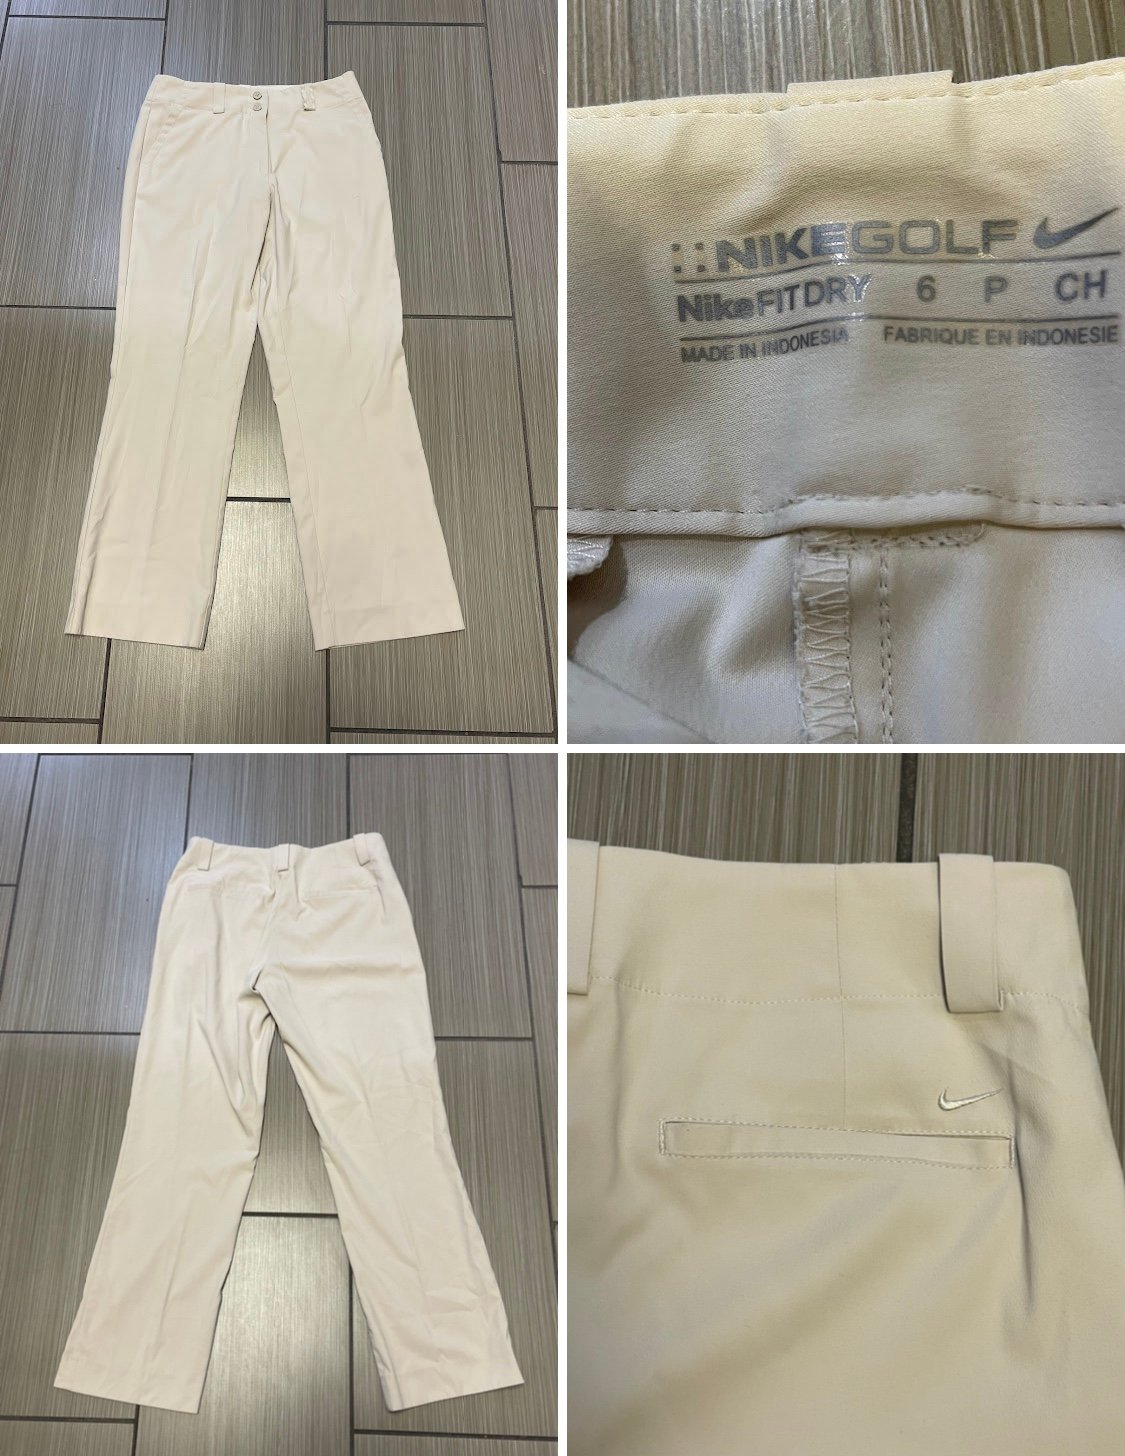 big discount Nike chino golf pants womens sz 6P cream fit dry athletic quick dry pants oXhCarFEu Low Price